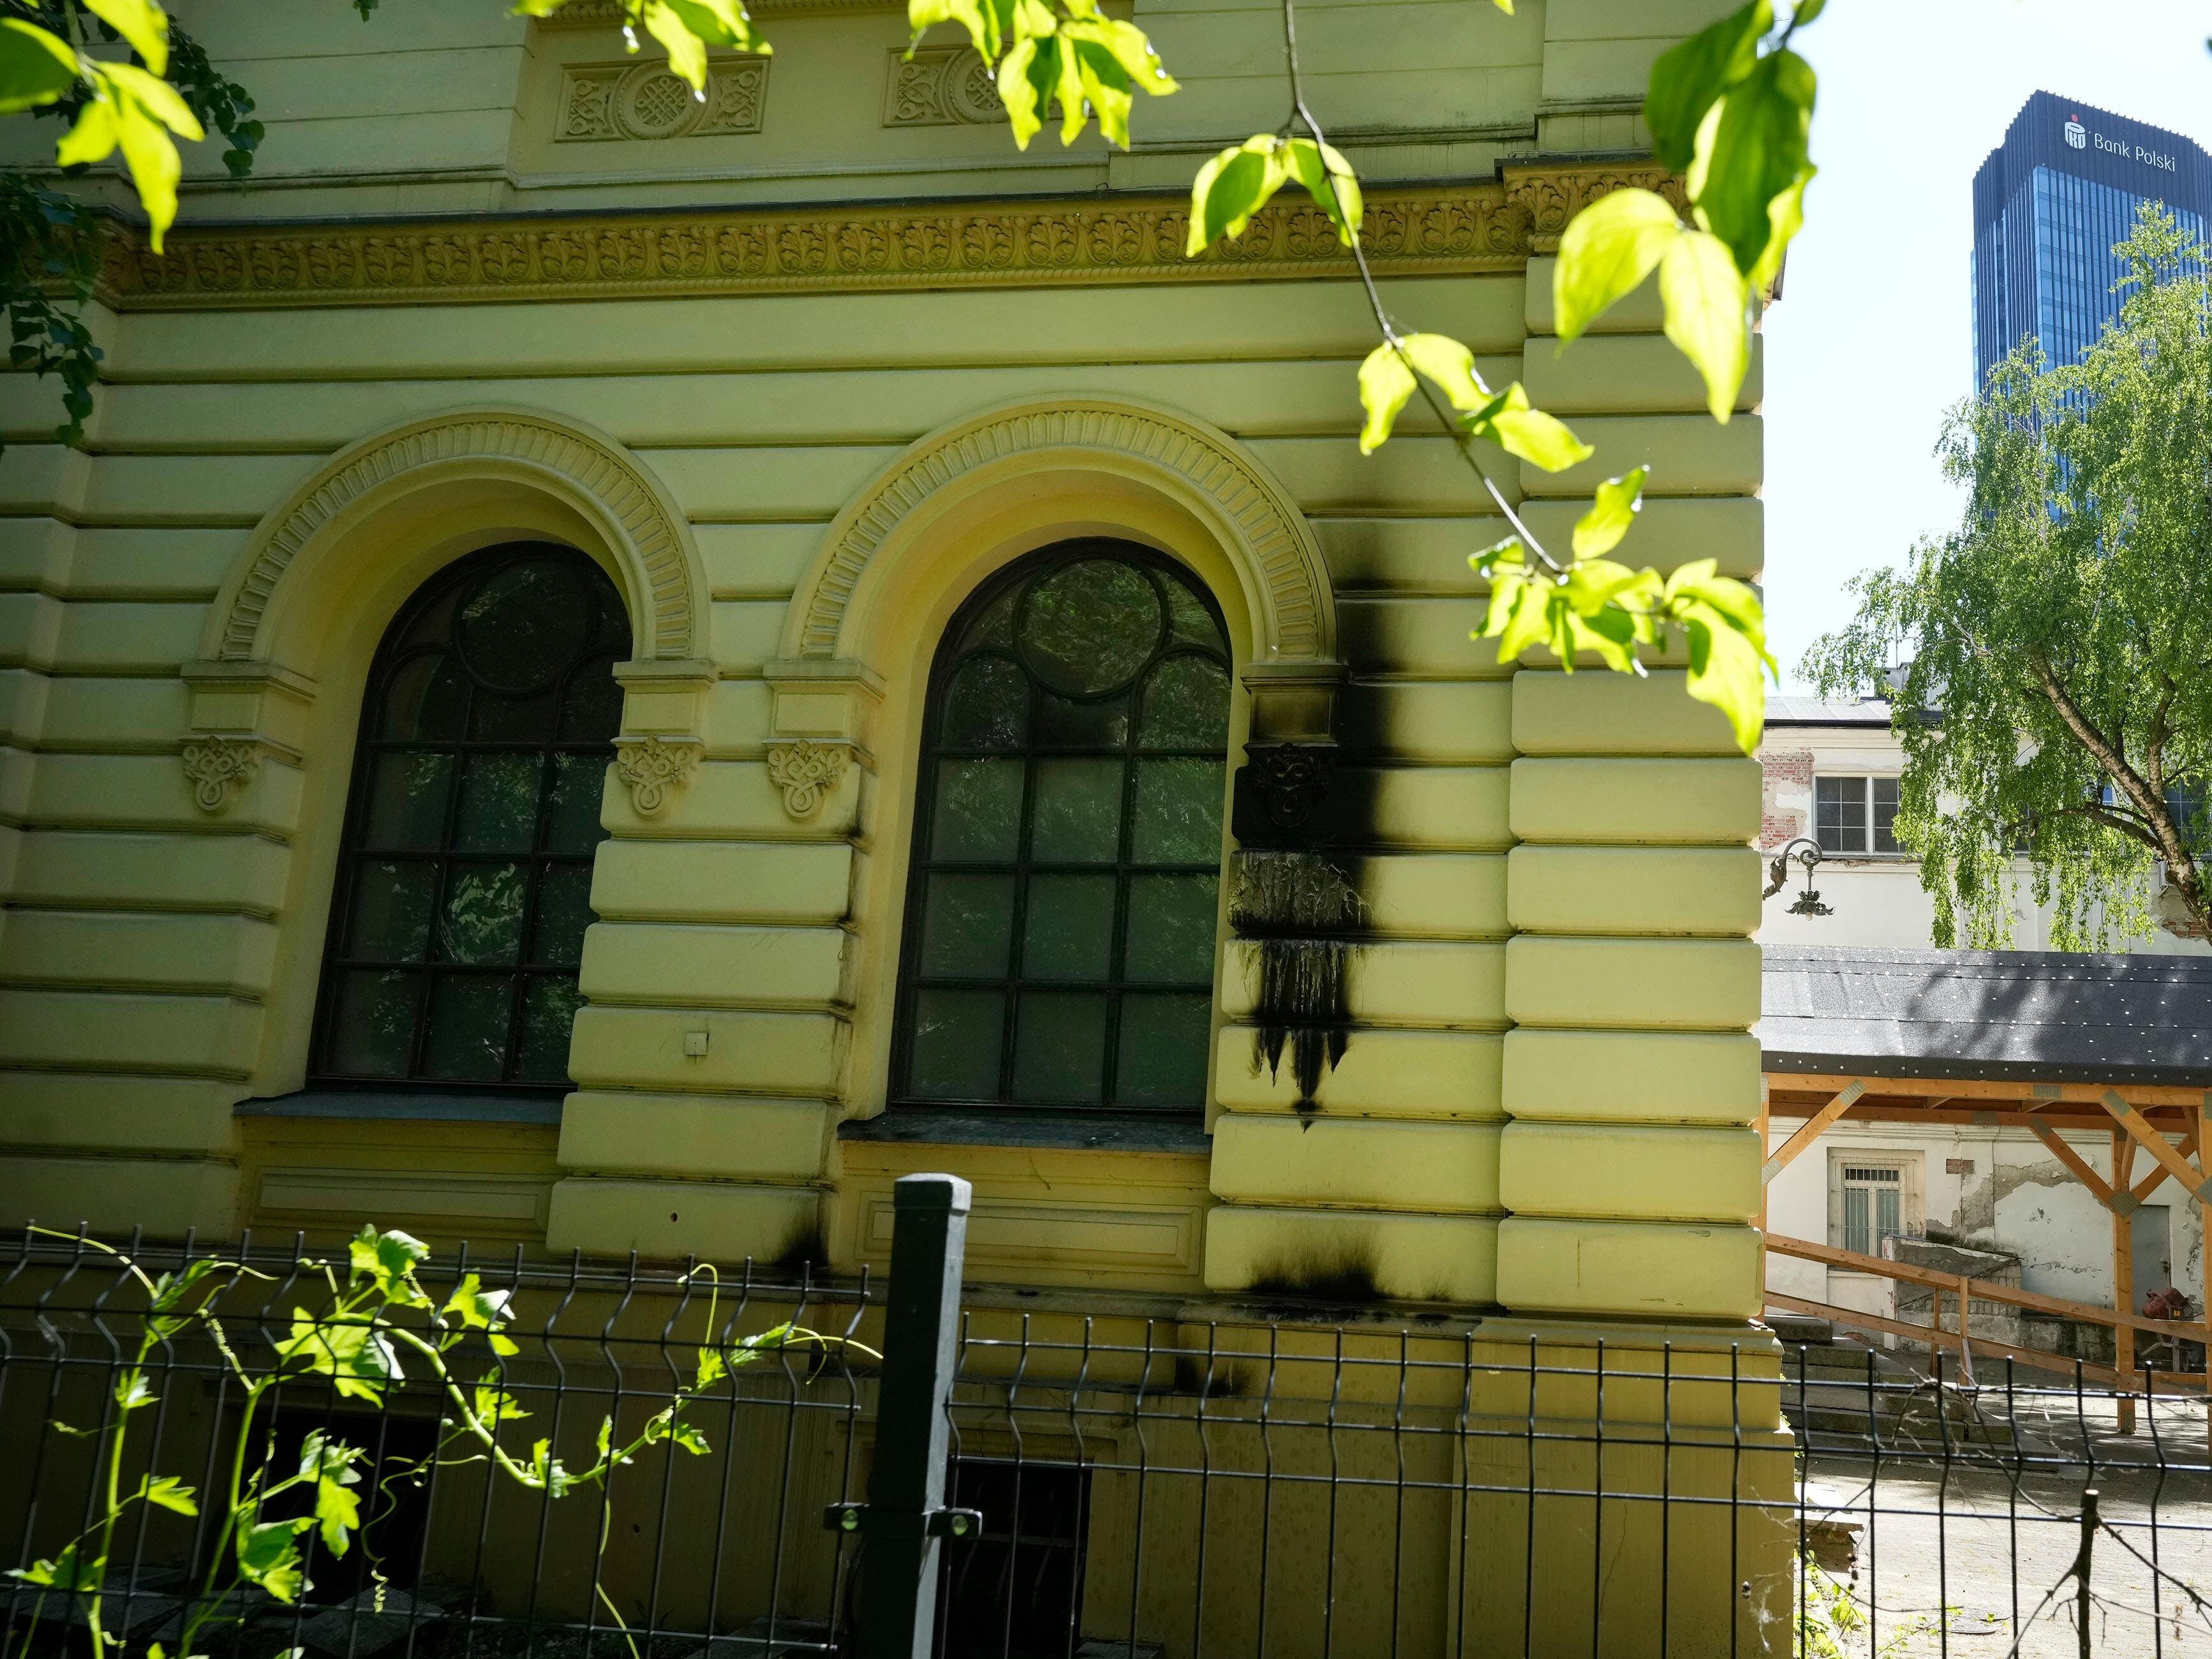 Warsaw synagogue attacked with firebombs